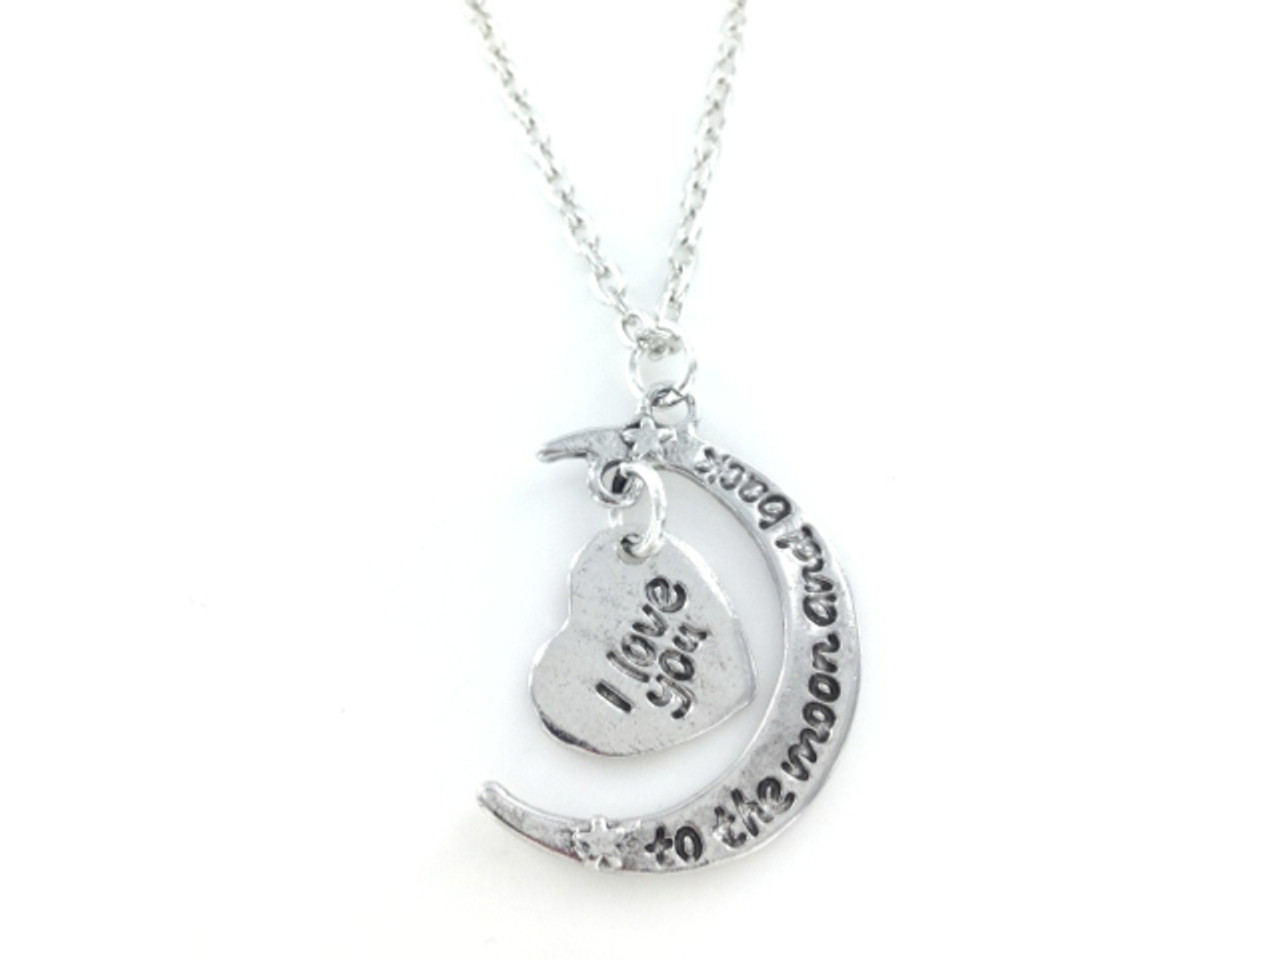 Personalised Moon & Back Necklace Giftbox | Posh Totty Designs